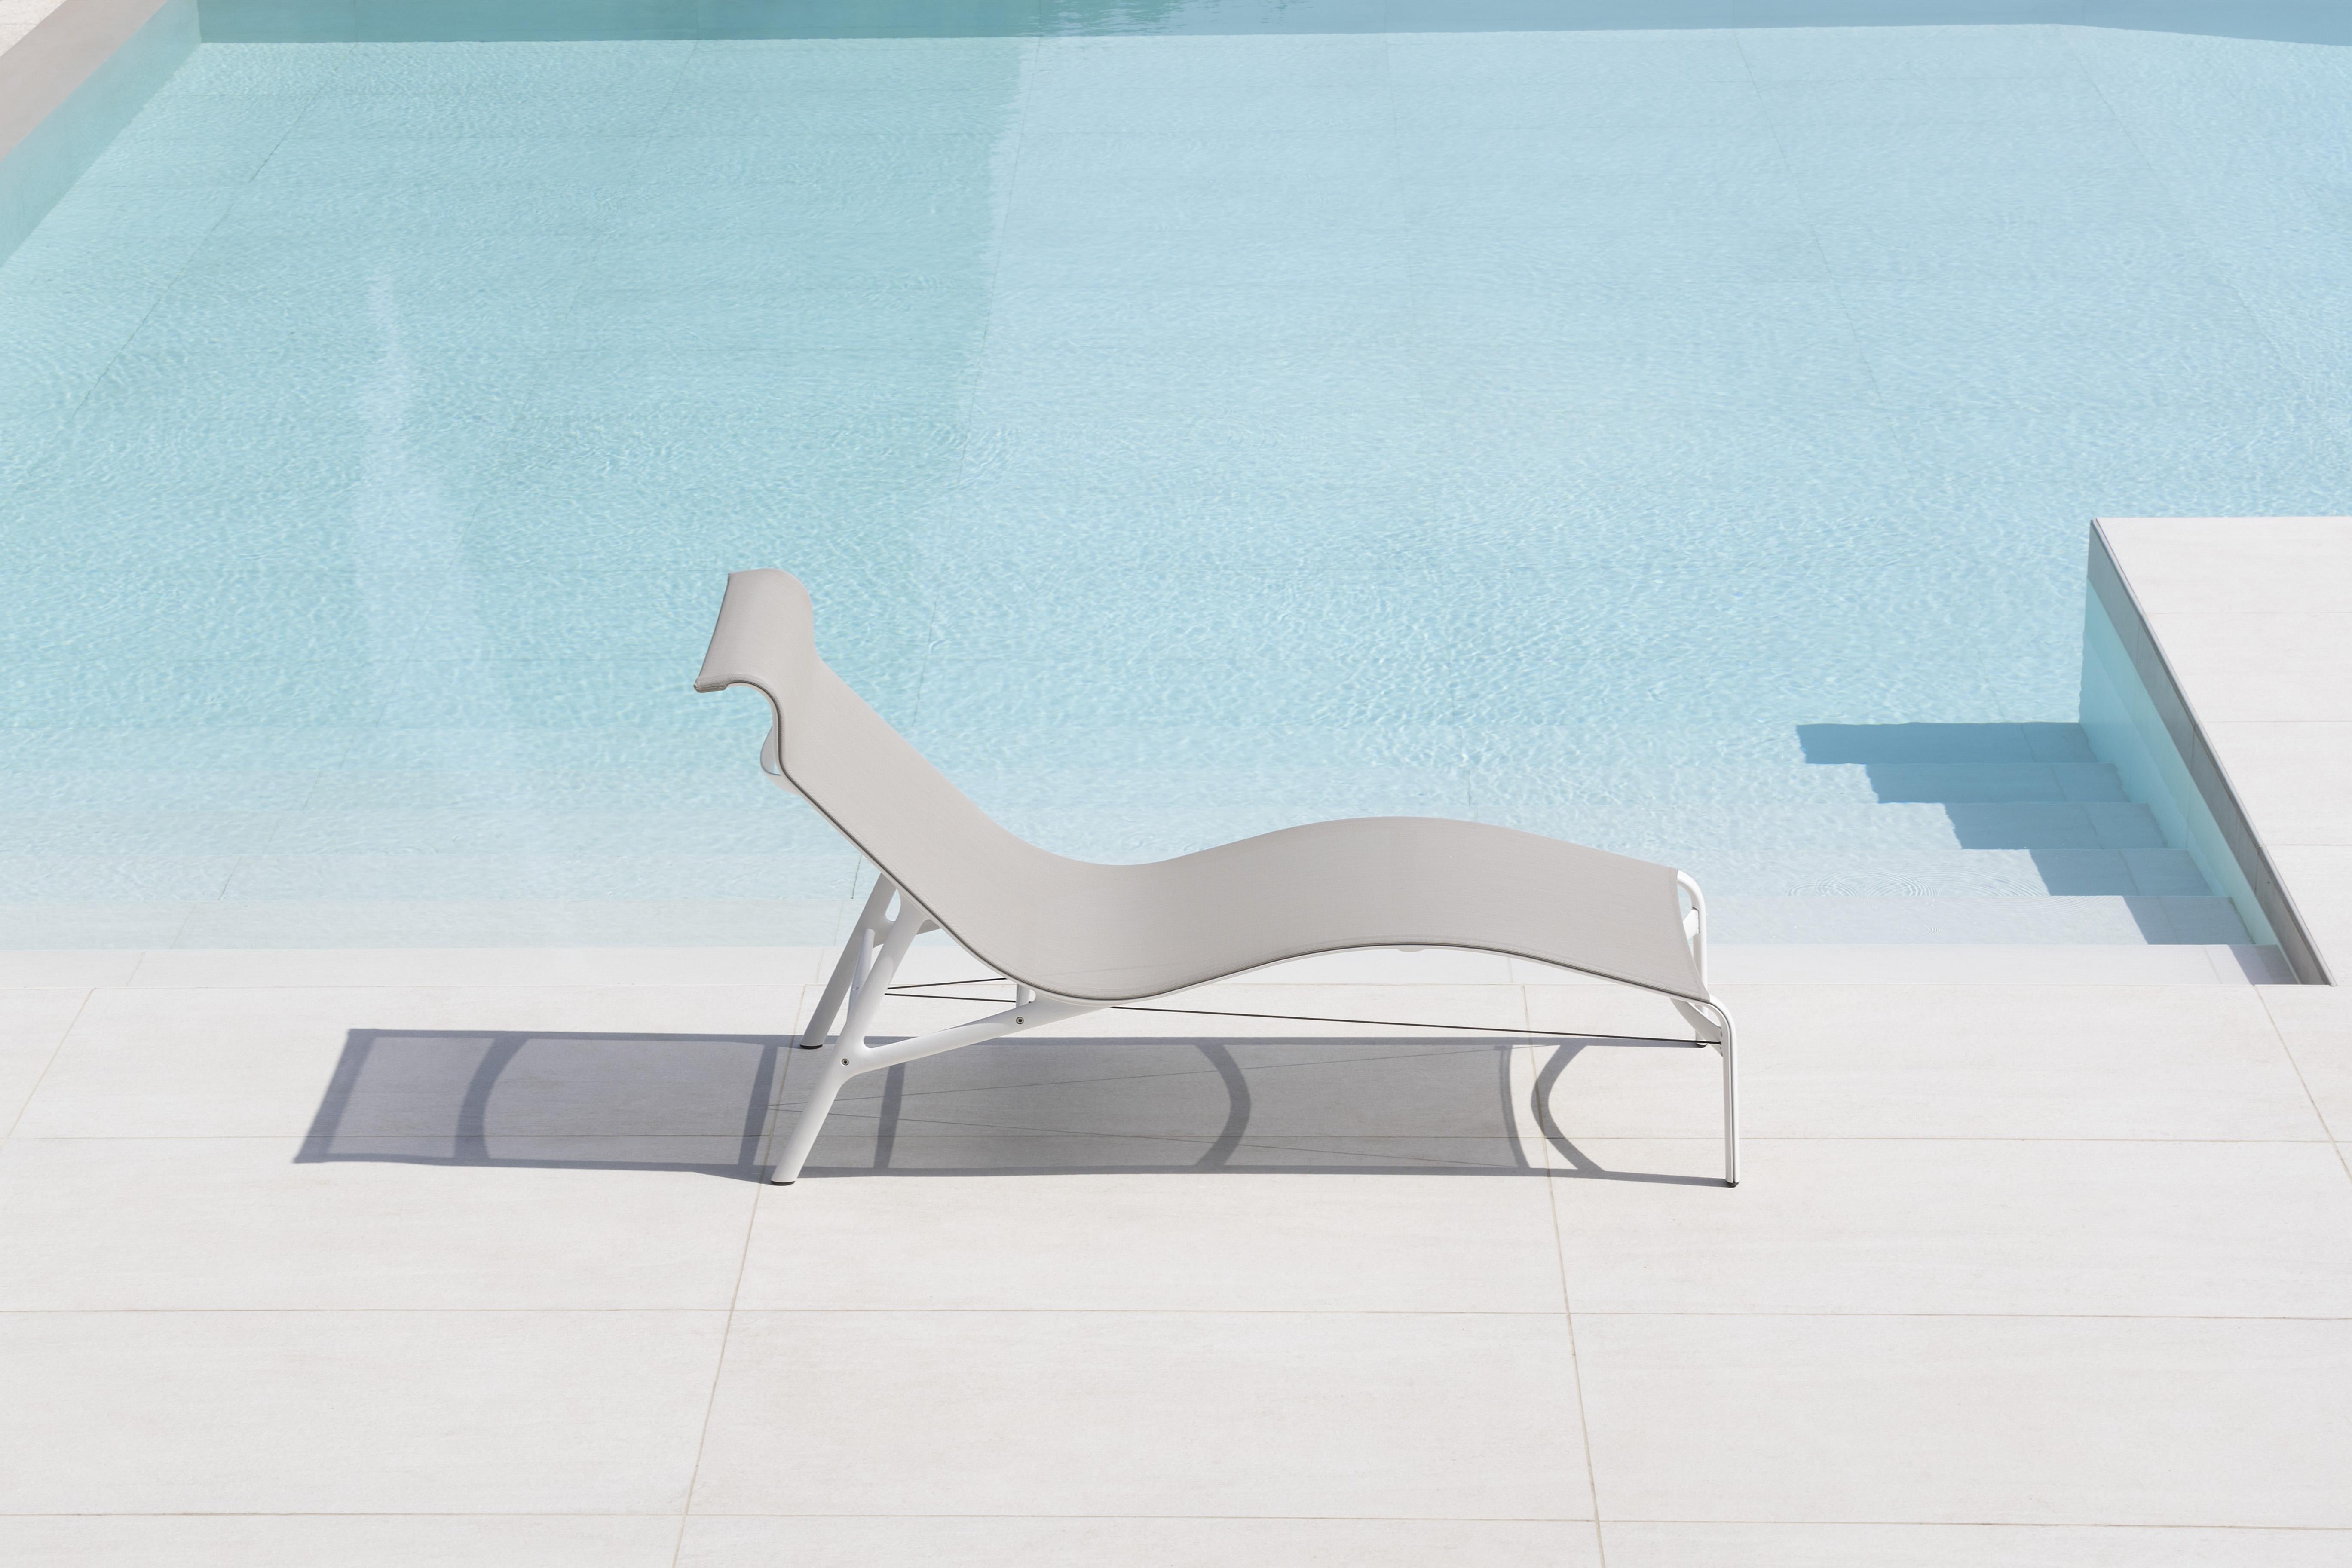 Alias 419_O Longframe Outdoor Chair in White Mesh with Lacquered Aluminum Frame by Alberto Meda

Chaise longue for outdoor use with structure composed of extruded aluminium profile and die-cast aluminium elements, seat and back in fire retardant PVC